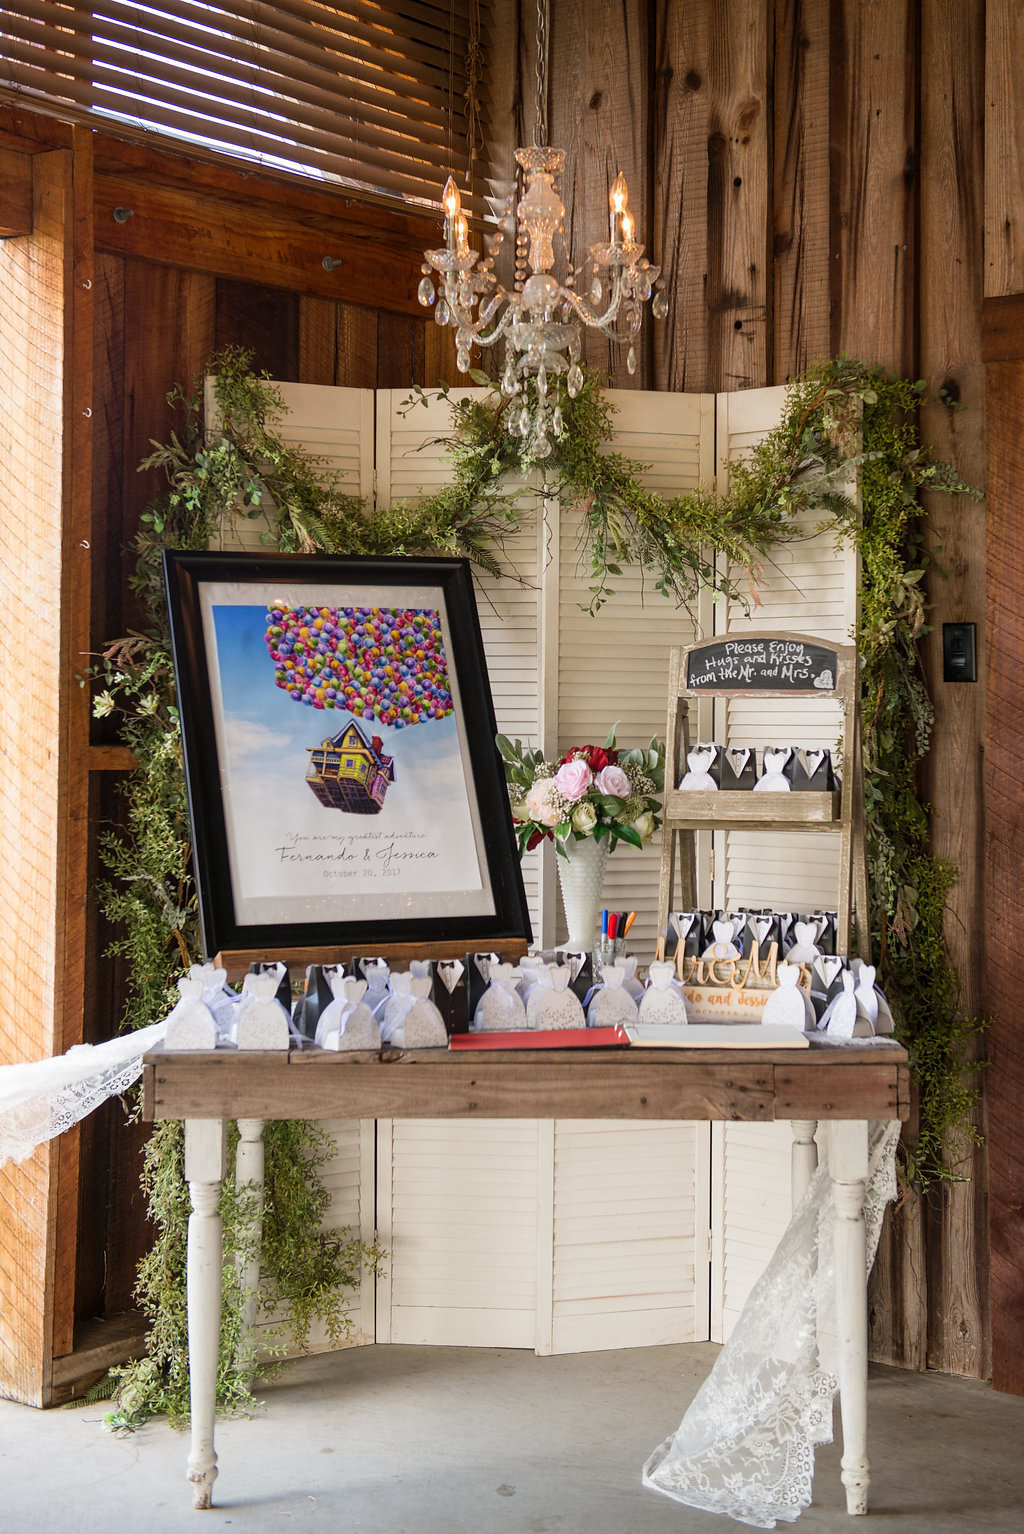 Barn Wedding Reception Favor Table with Framed Disney Up Movie Poster, and Black and White Favors, with Vintage Chandelier, Wooden Table, and Greenery Garland